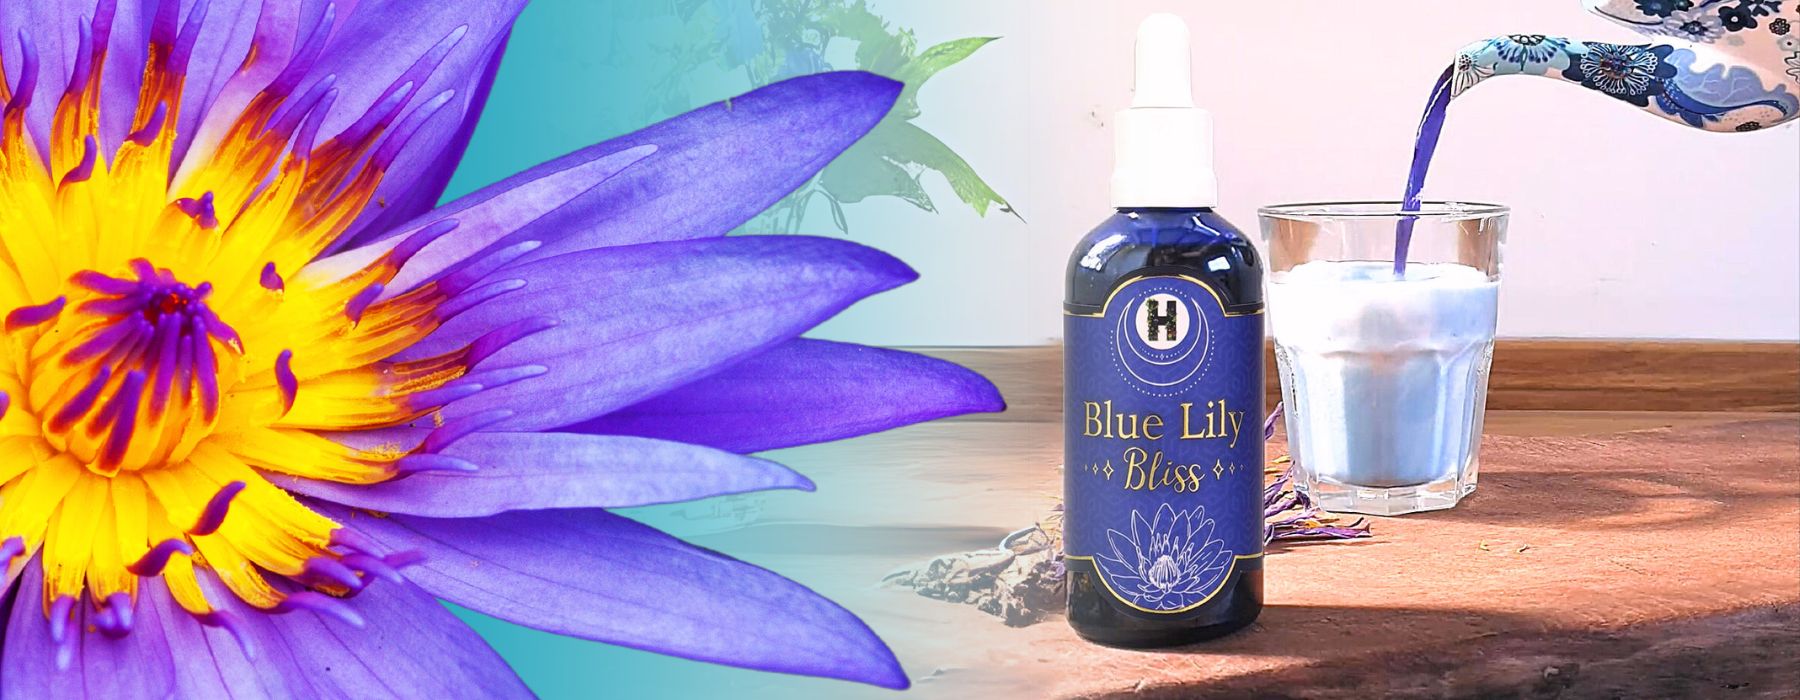 Blue Lily BLISS Milk